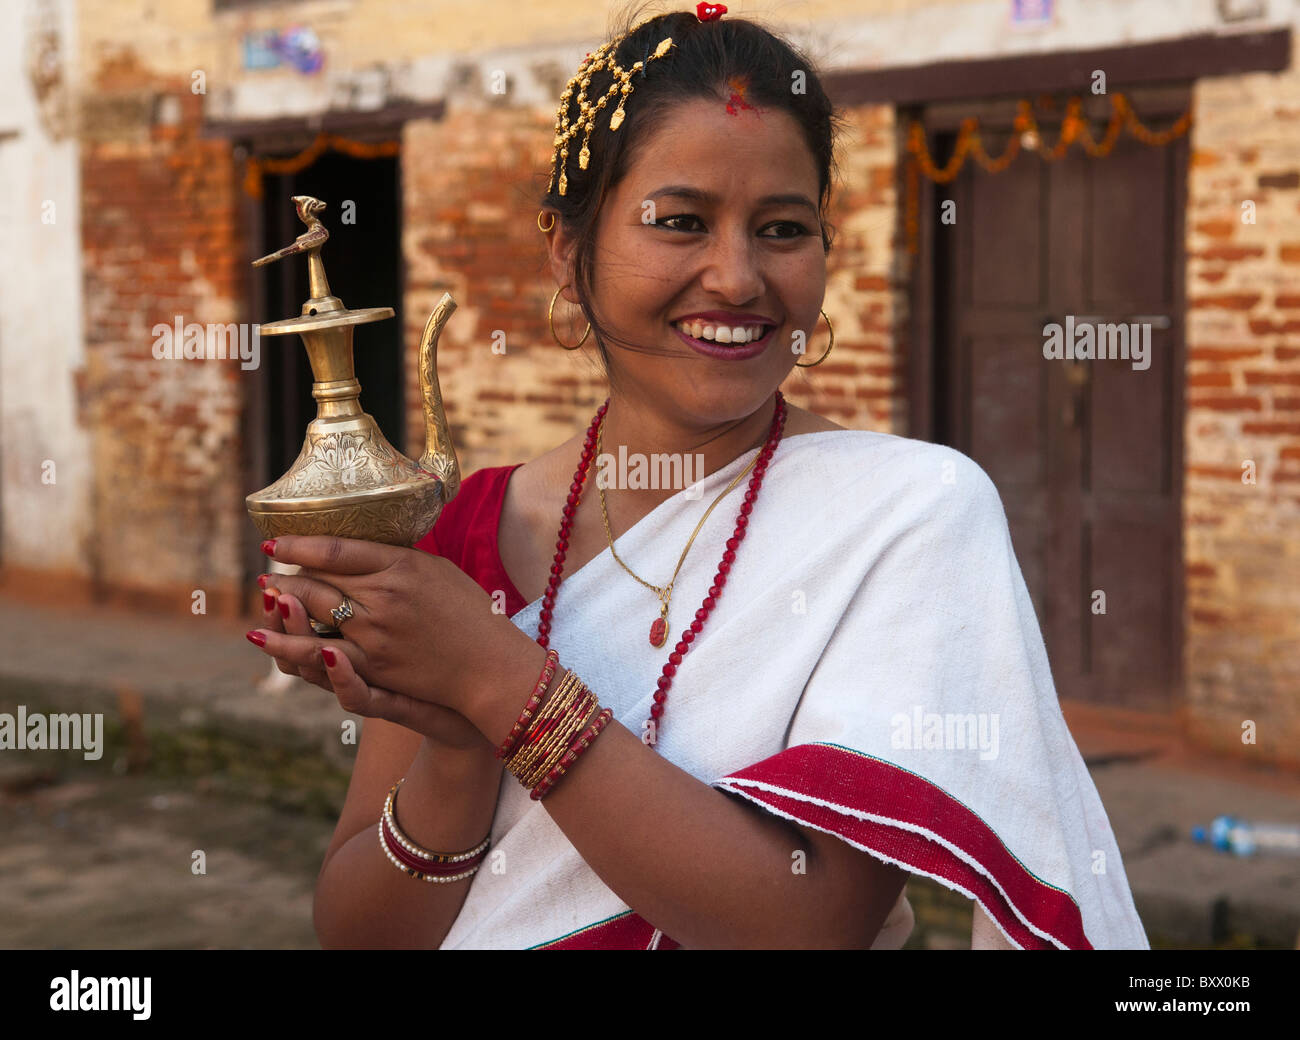 portrait of a woman in traditional dress in Durbar Square, Kathmandu, Nepal Stock Photo